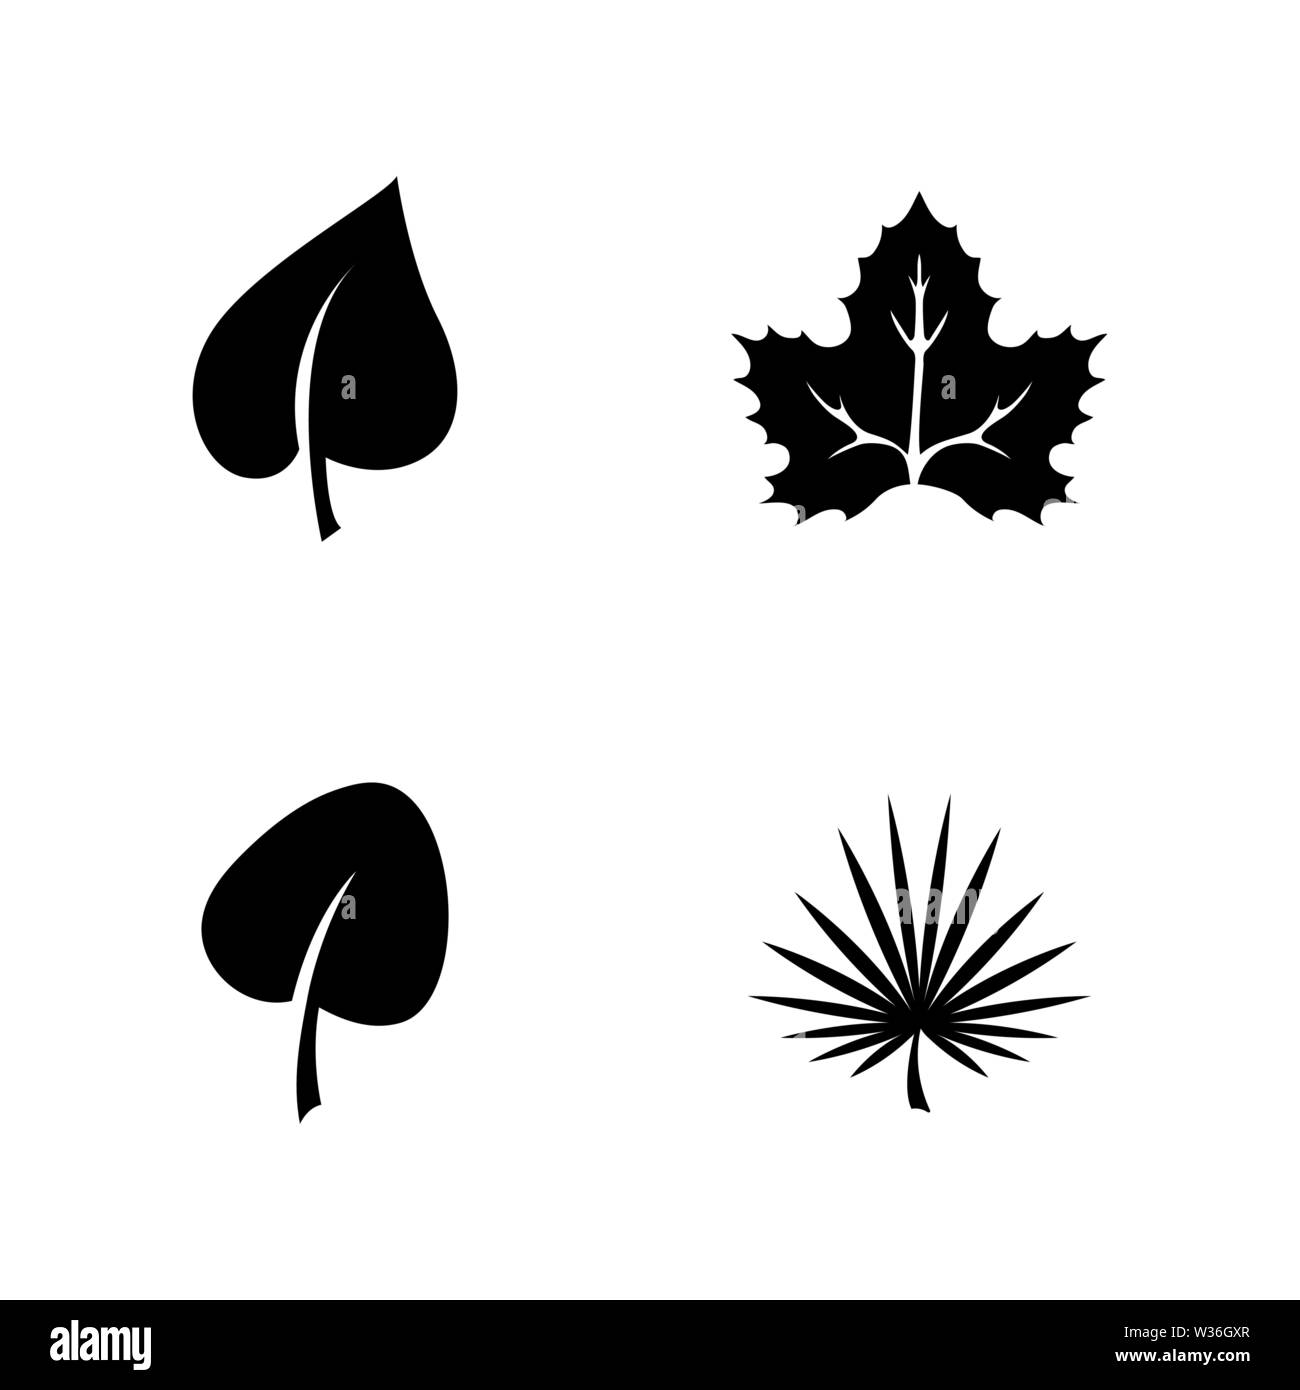 Leaf Organic Plant. Simple Related Vector Icons Set for Video, Mobile Apps, Web Sites, Print Projects and Your Design. Leaf Organic Plant icon Black F Stock Vector